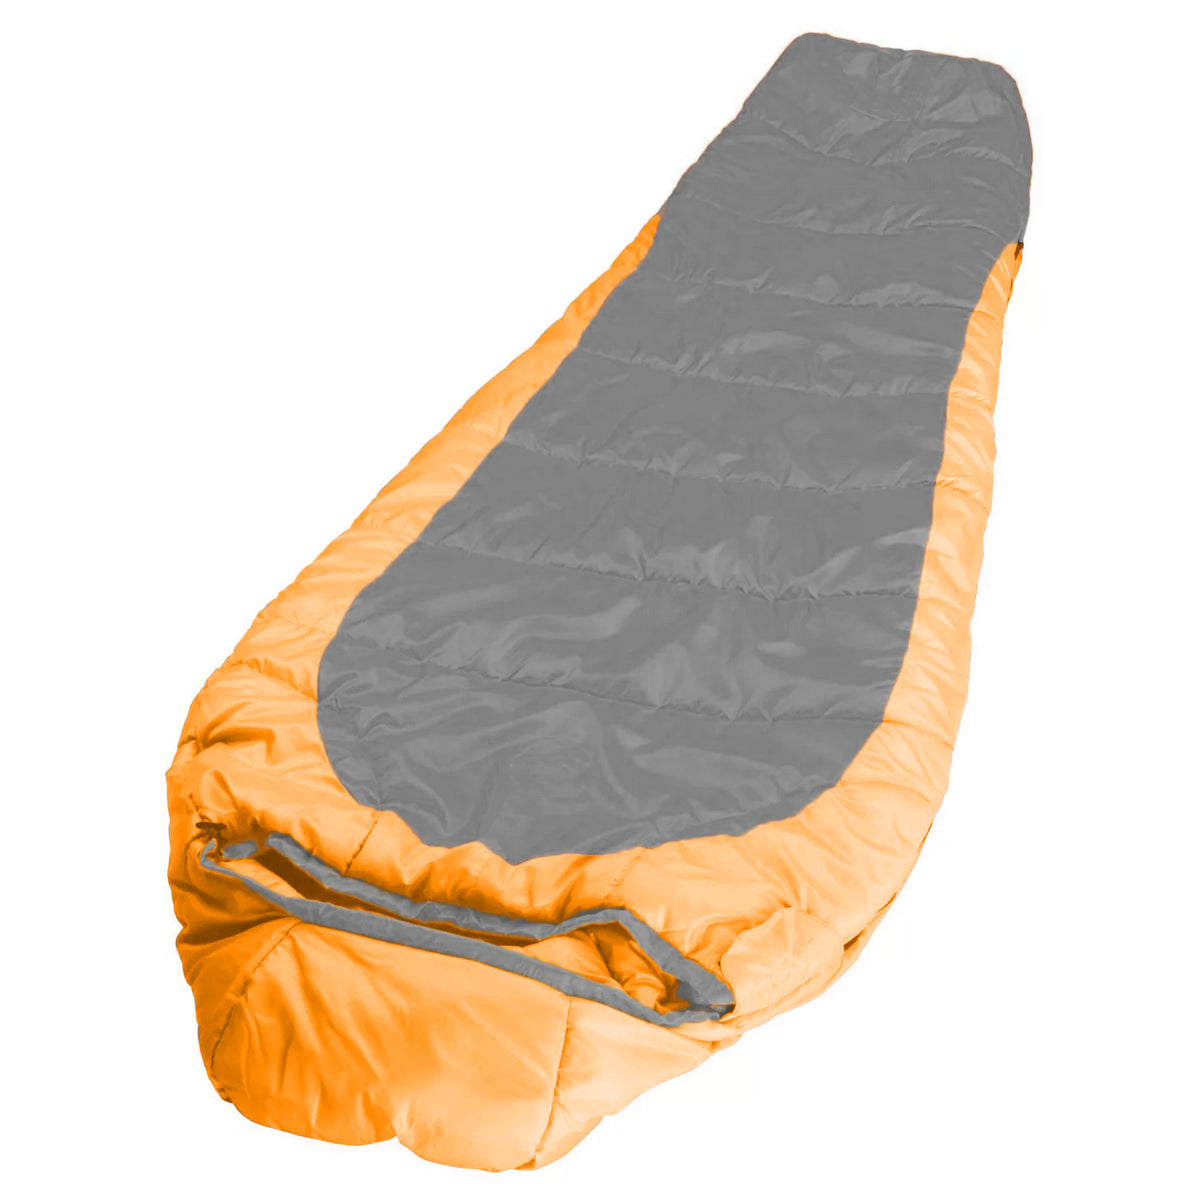 JUNELILY Mummy-Style Sleeping Bag 10°F Insulation for Camping Hiking